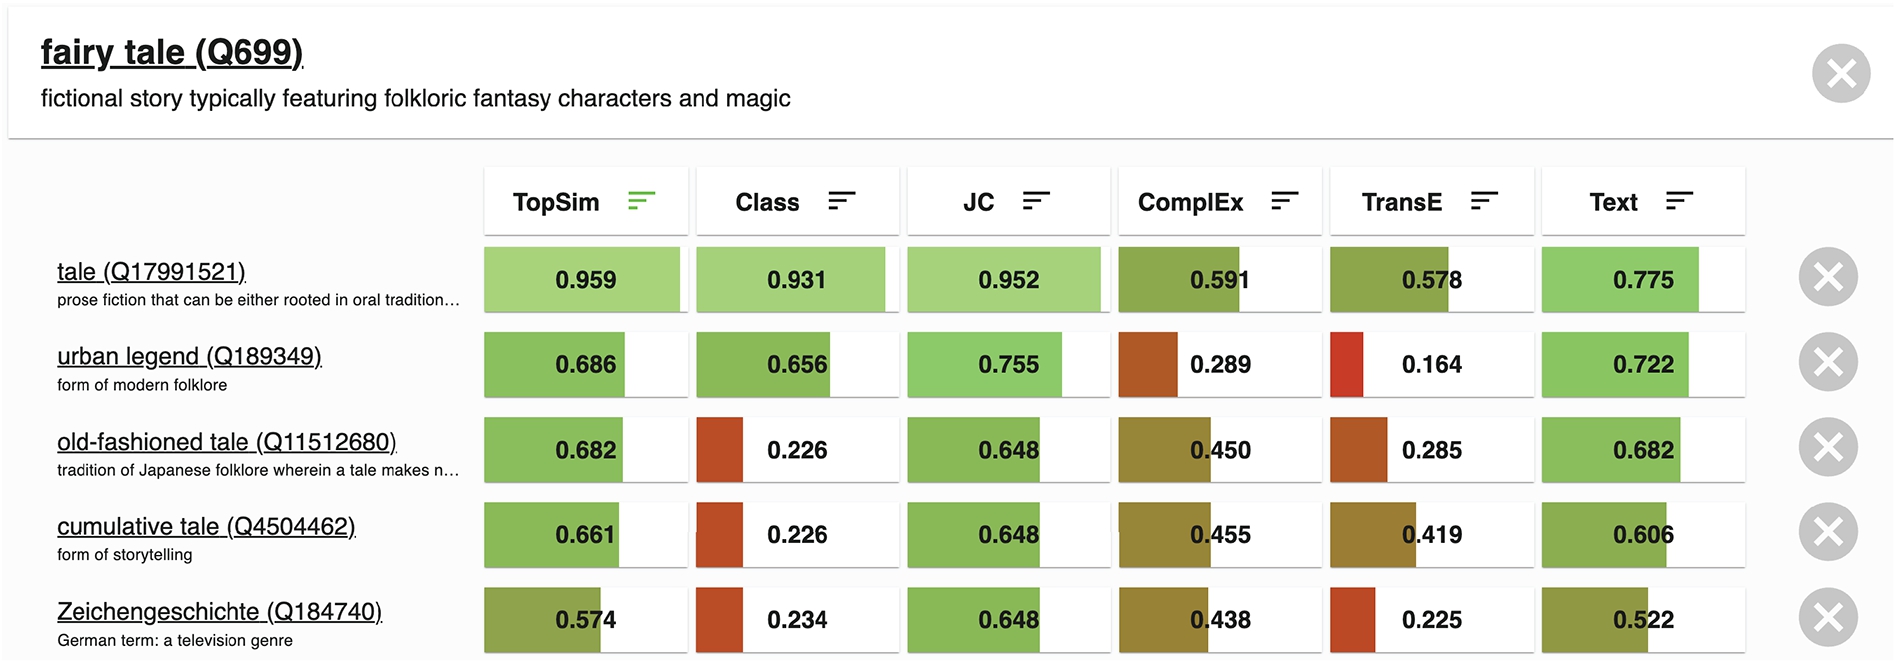 Similarity scores with the KGTK similarity GUI [40] between fairy tale, and its parent (tale) and siblings.